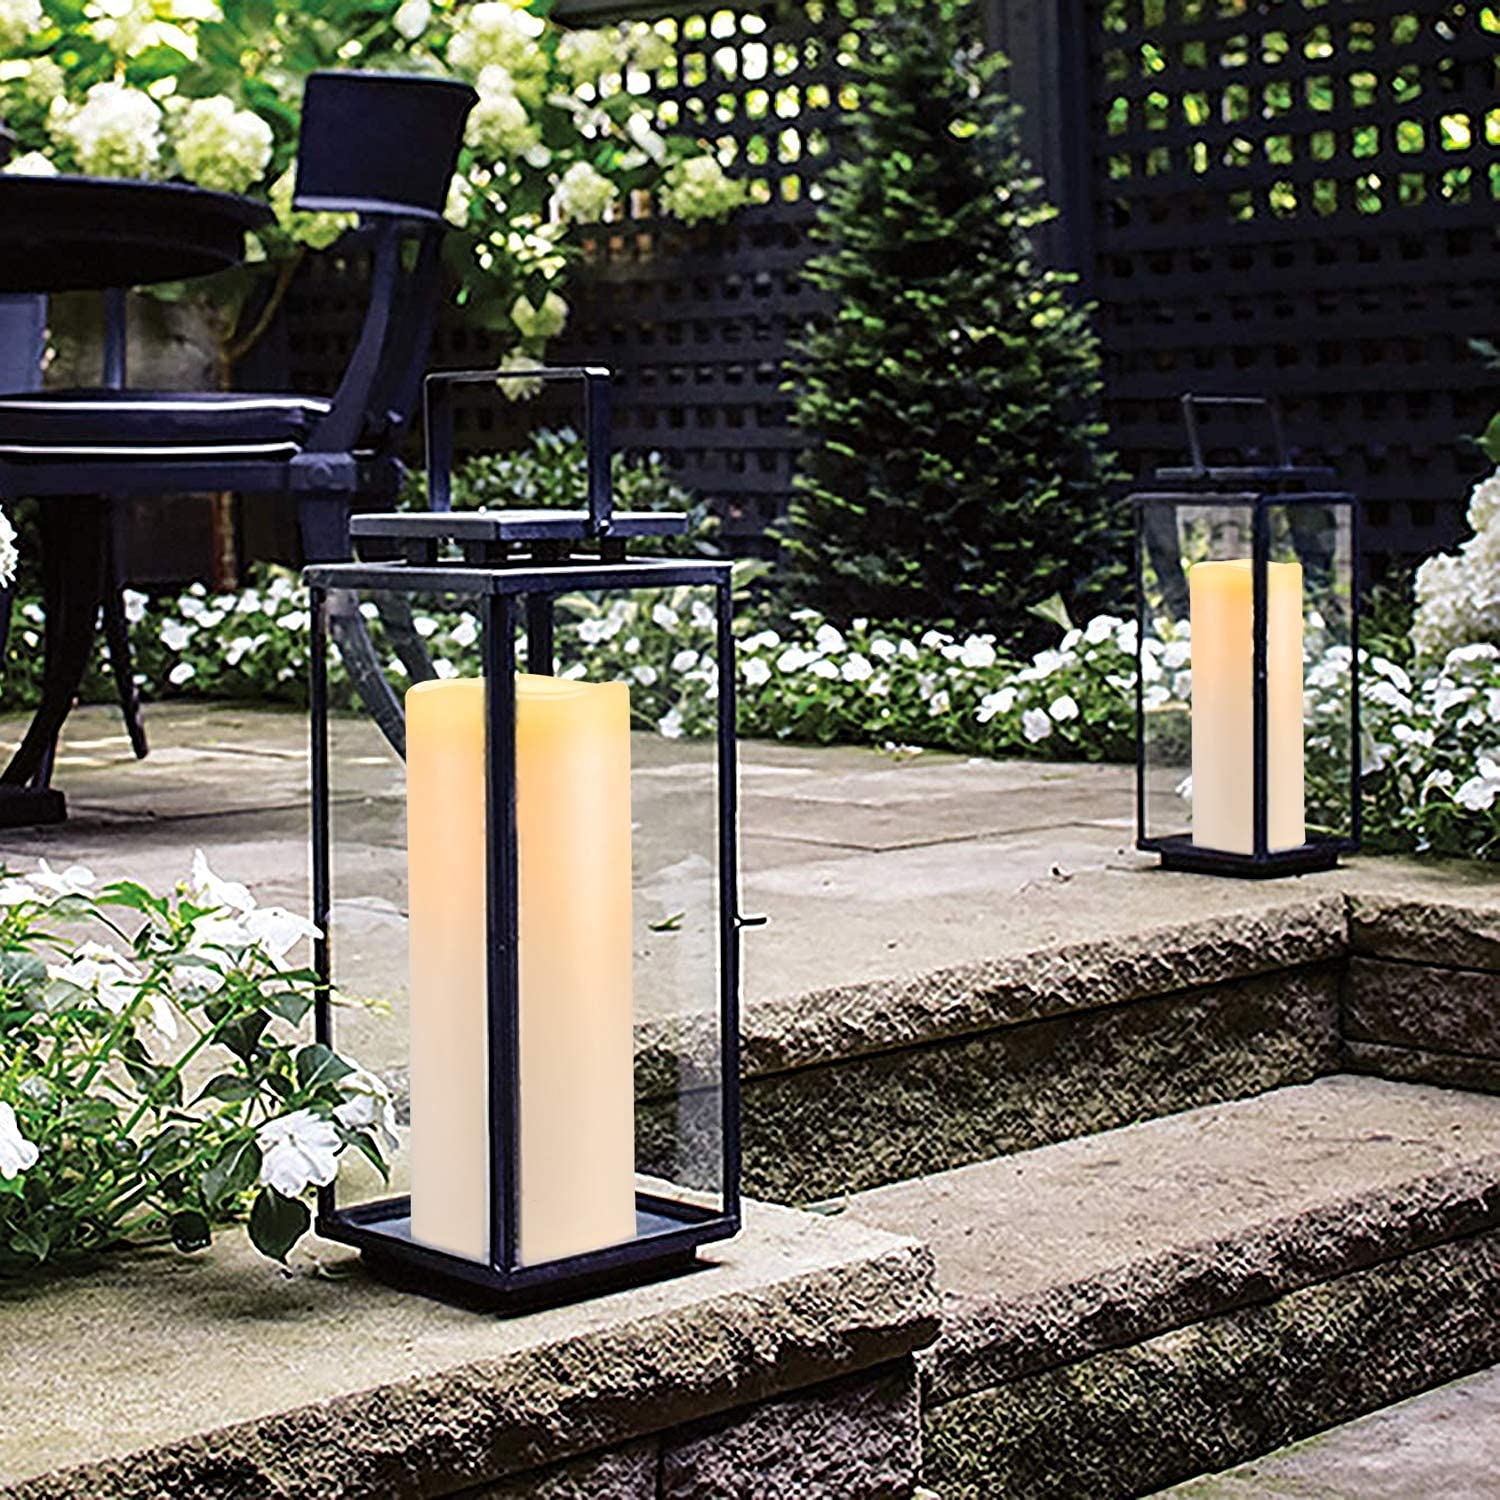 Homemory 4" x 10" Large Waterproof Outdoor Flameless Candles, Battery Operated LED Pillar Candles with Remote and Timers for Indoor Outdoor Lanterns, Long Lasting, Dark Ivory, Set of 2